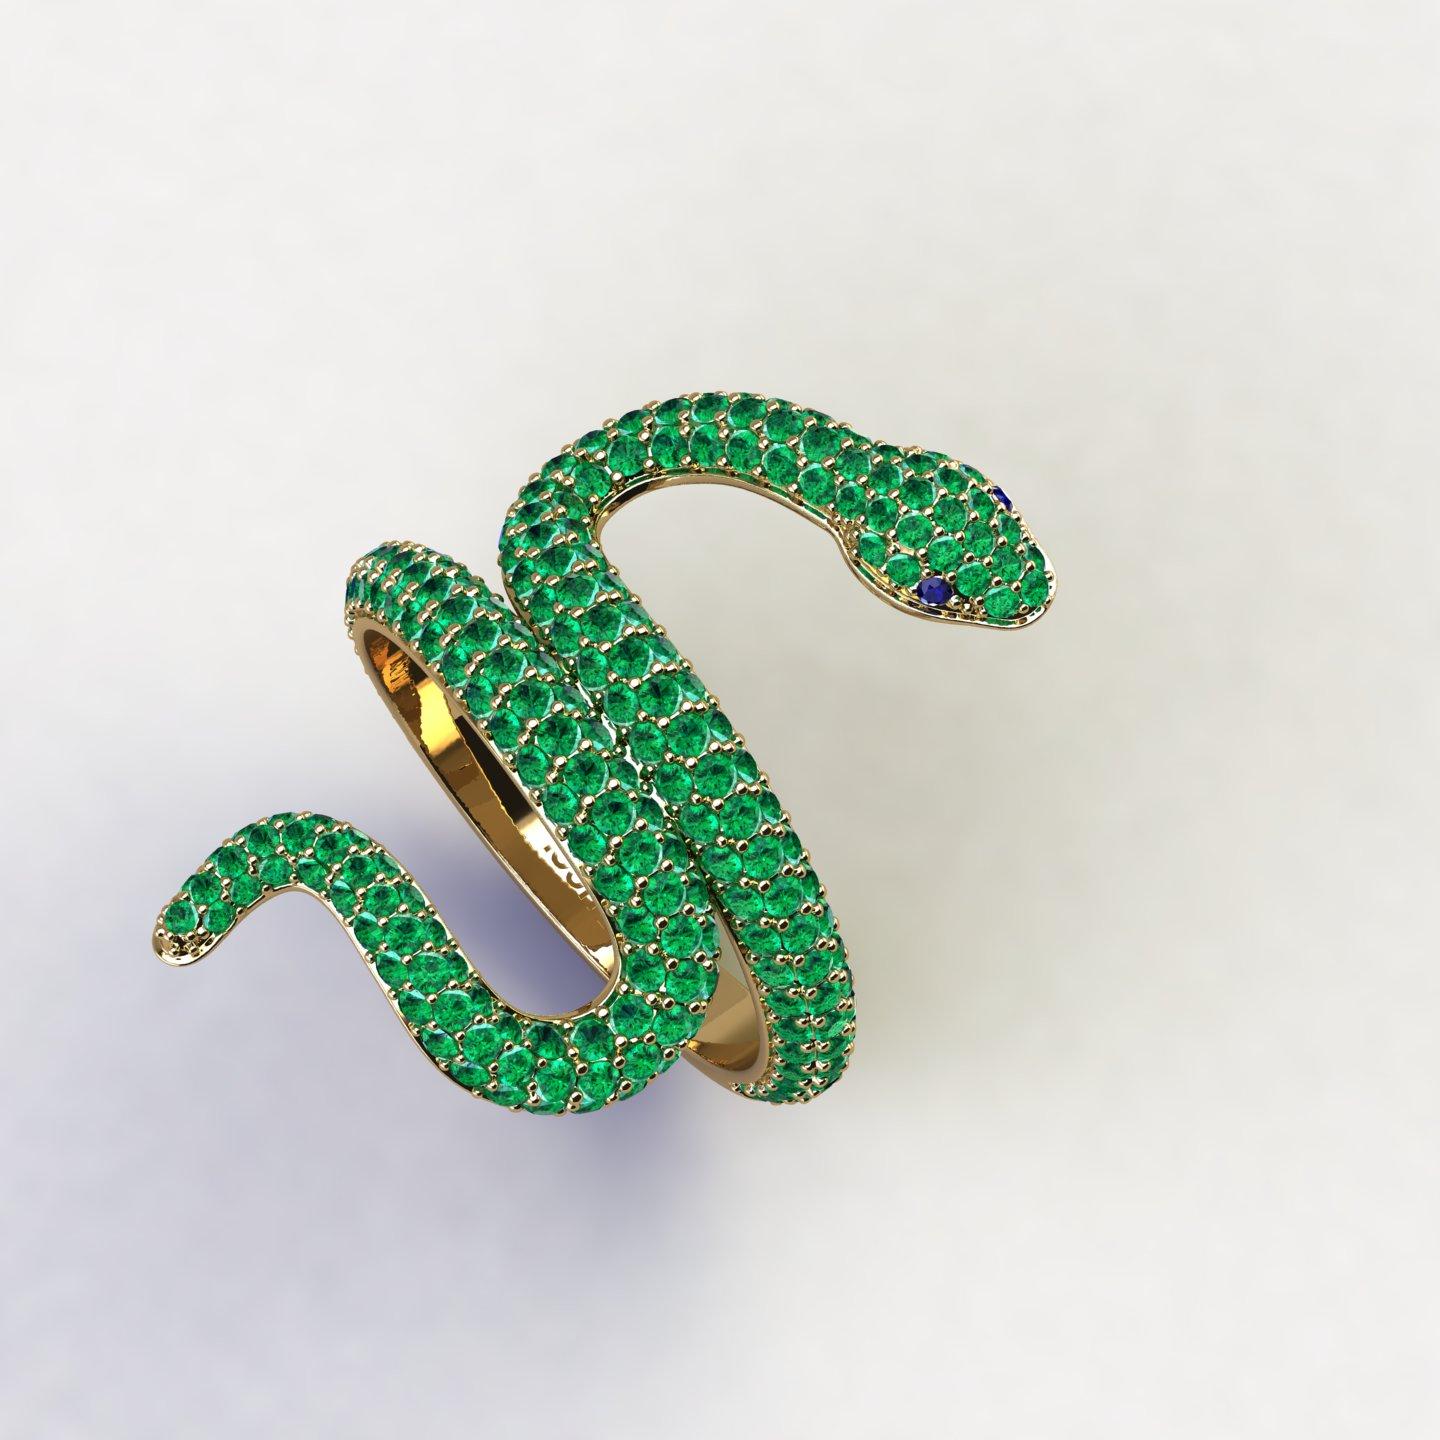 Emeralds Pave' Snake 14k Yellow Gold Ring, bright green hand picked emeralds, for an approximate 1.35 carats, made in 14k Yellow gold to help the slim design, to have more robustness.
Made to order in your finger size, due to the fitting in relation